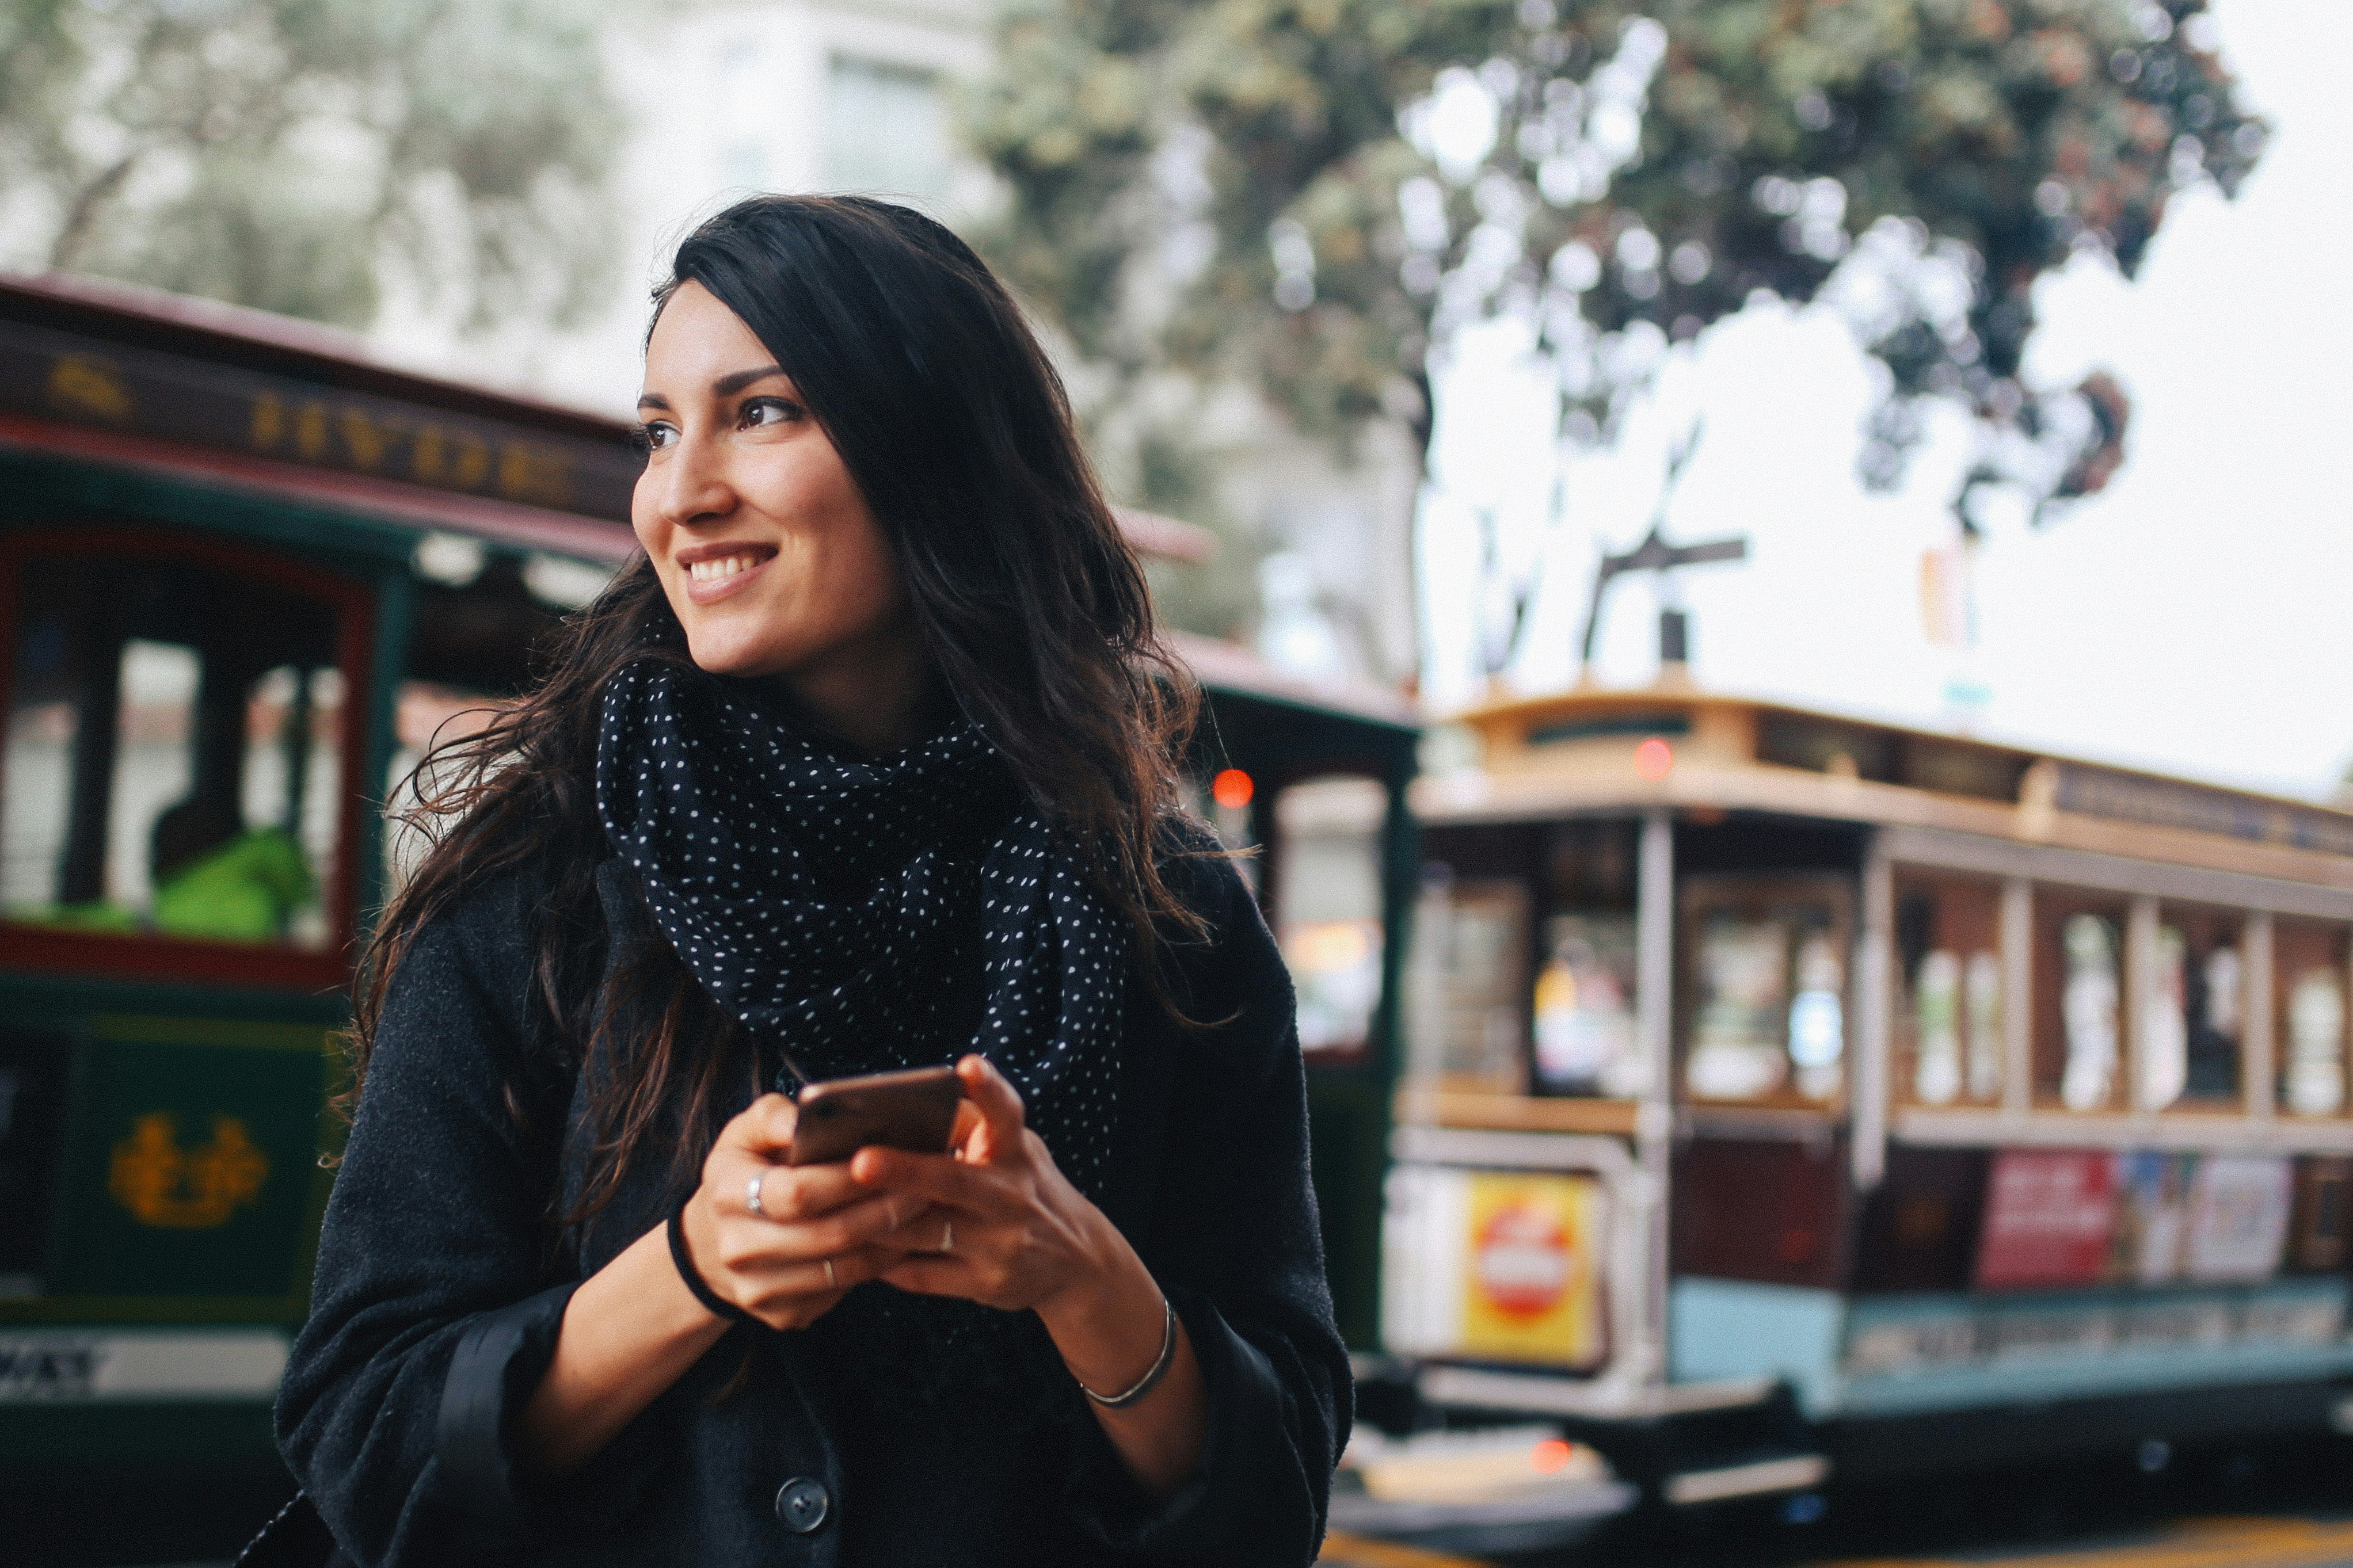 Smiling young woman holding her phone in San Francisco, California